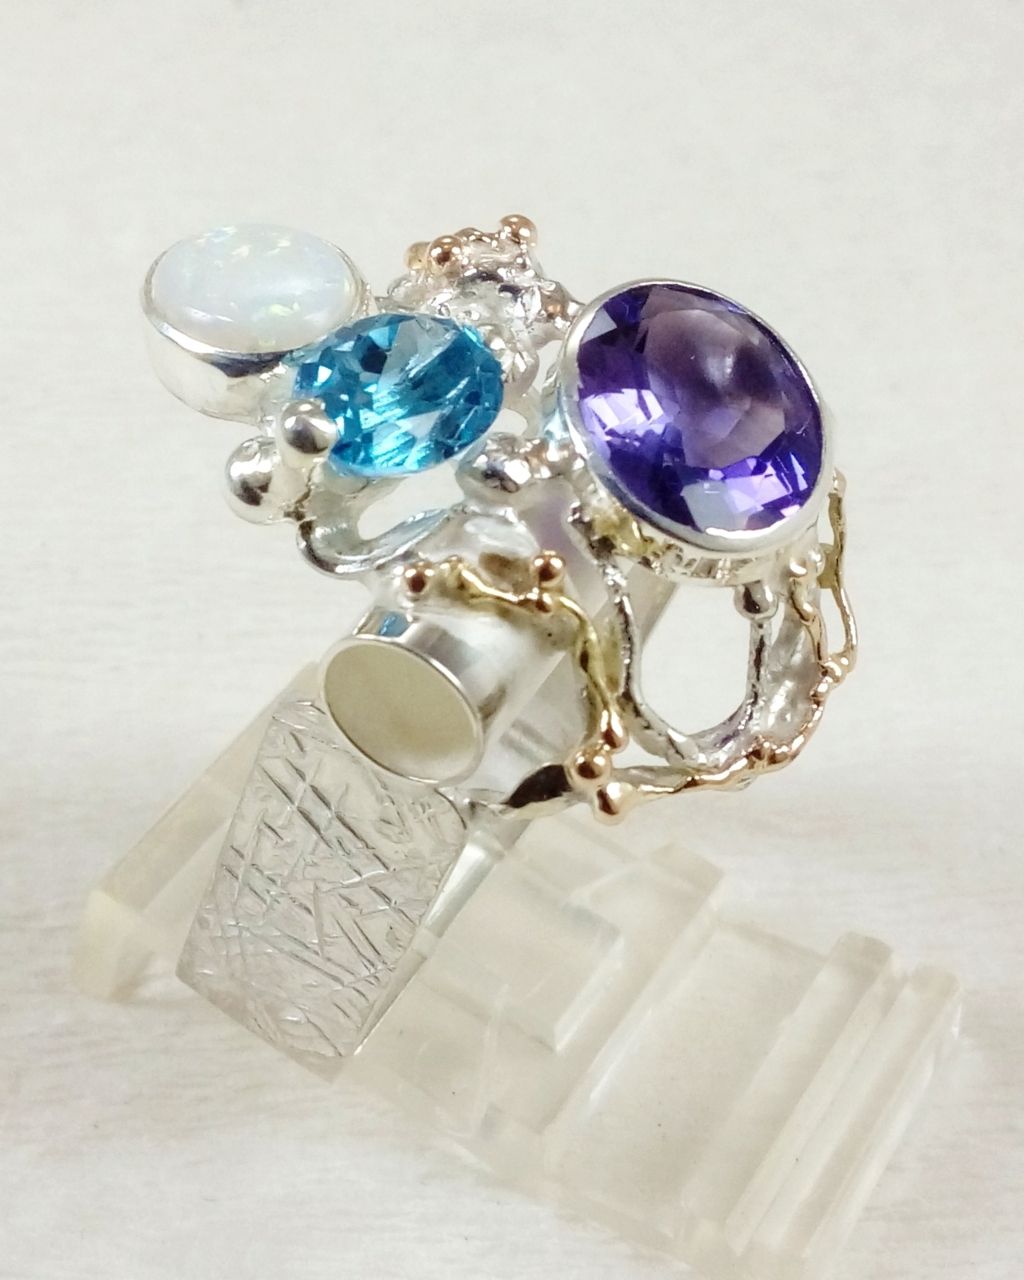 gregory pyra piro art jewelry, jewelry similar to american art, handcrafted ring 2055, ring with amethyst and blue topaz, ring with opal and gemstones, rings sold in art galleries, rings handmade by artist, jewelry gift for mom who likes retro style, handmade gifts and jewelry for mom who likes antiques and retro fashion, jewellery like at the desire fair